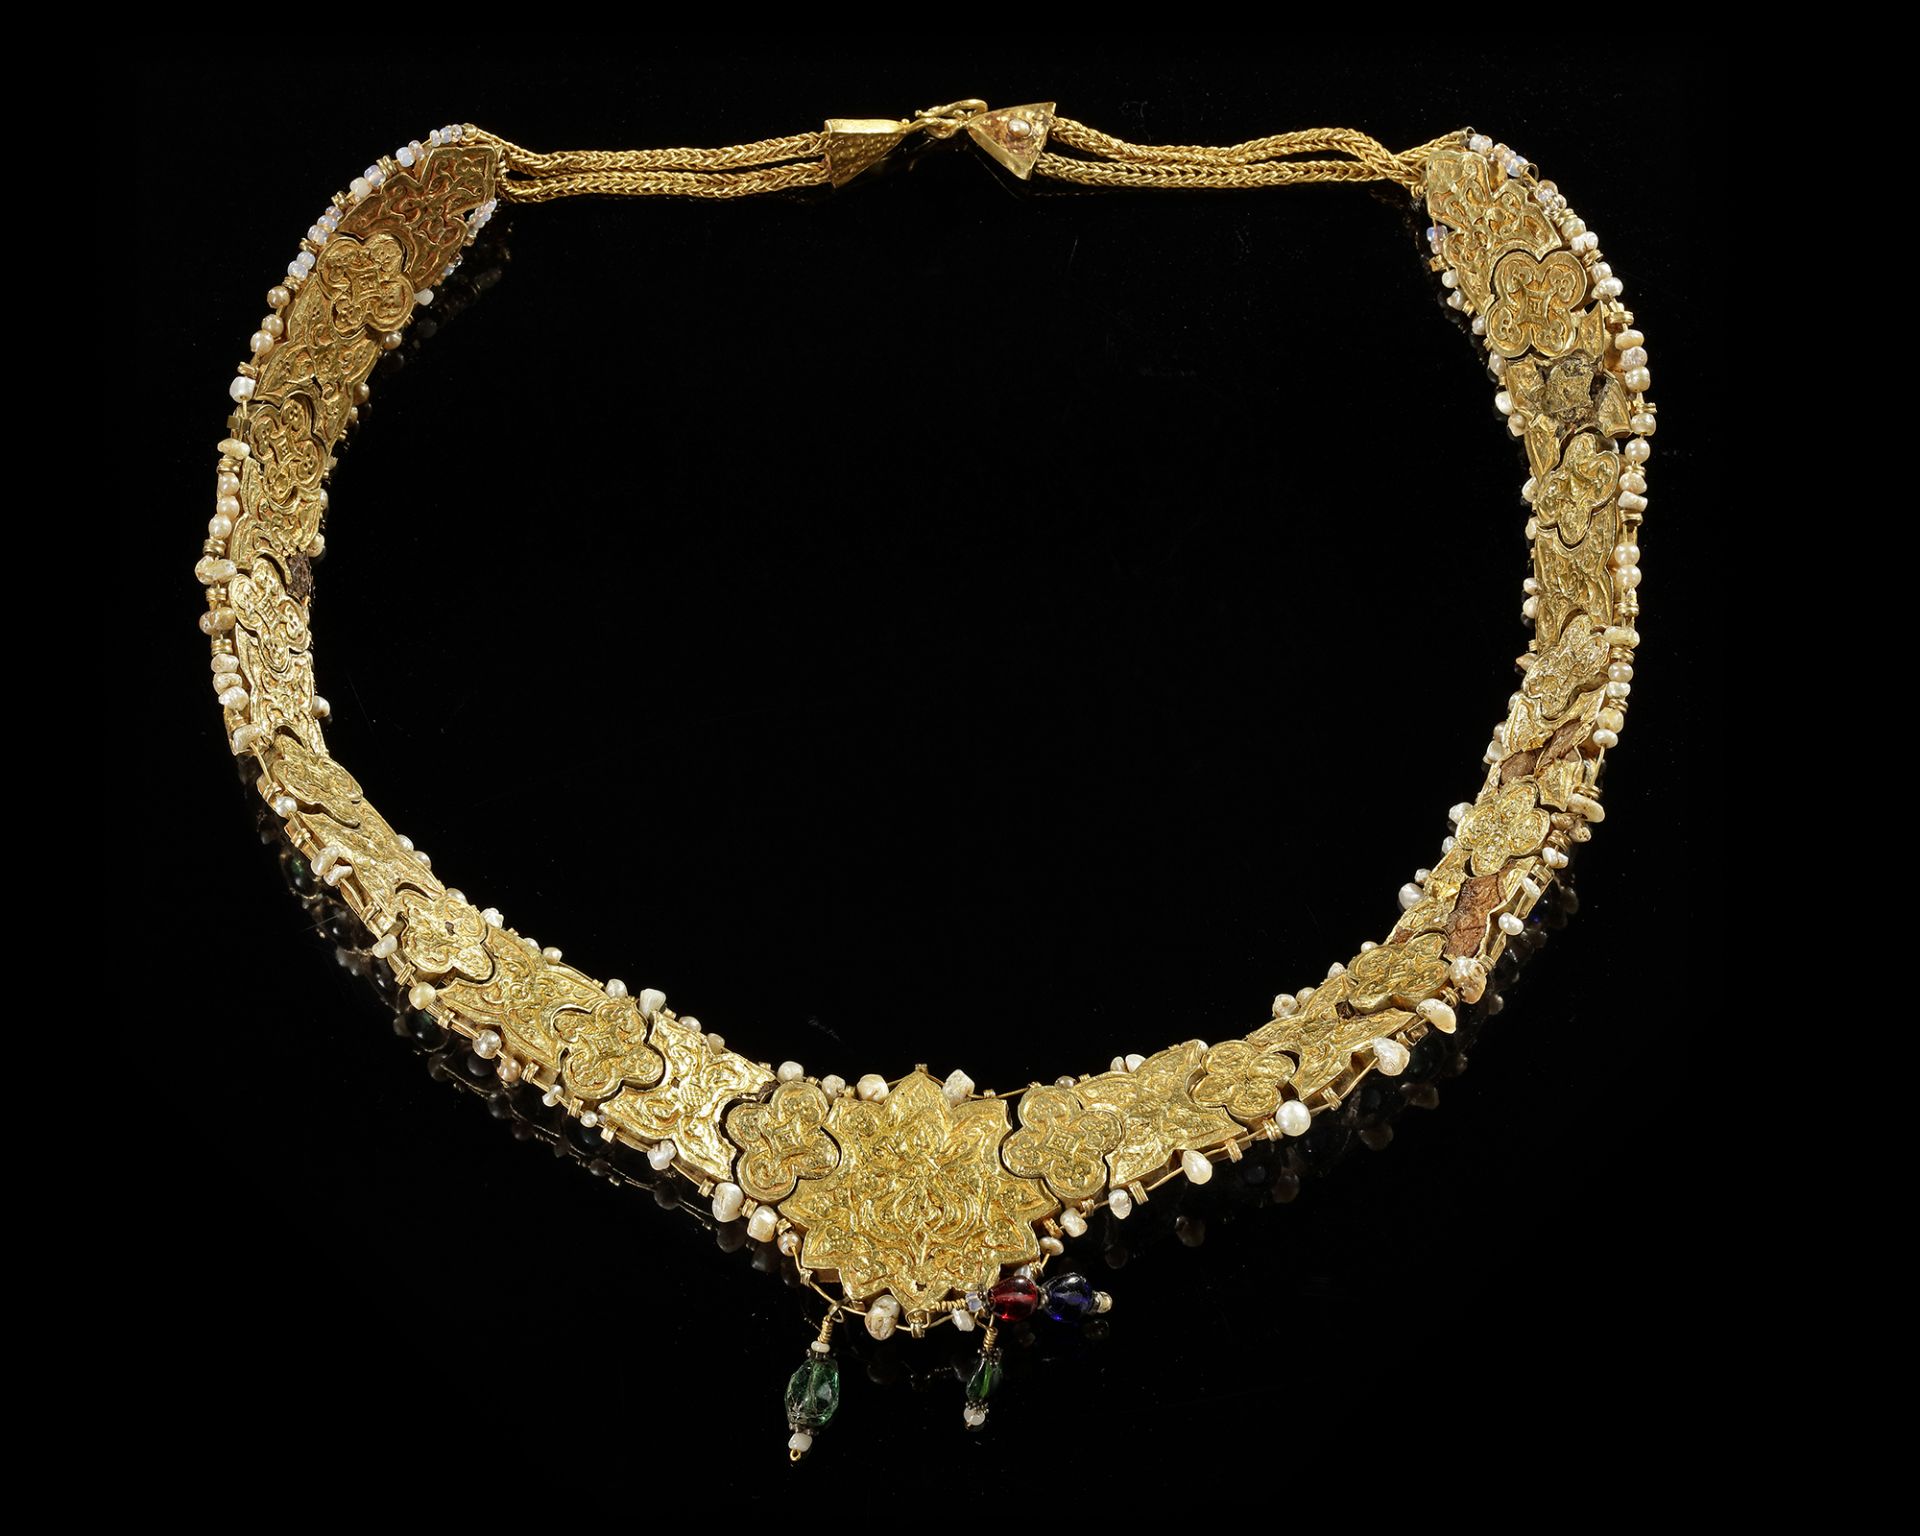 A MUGHAL GEM-SET ENAMELED GOLD NECKLACE, LATE 18TH CENTURY - Image 6 of 8